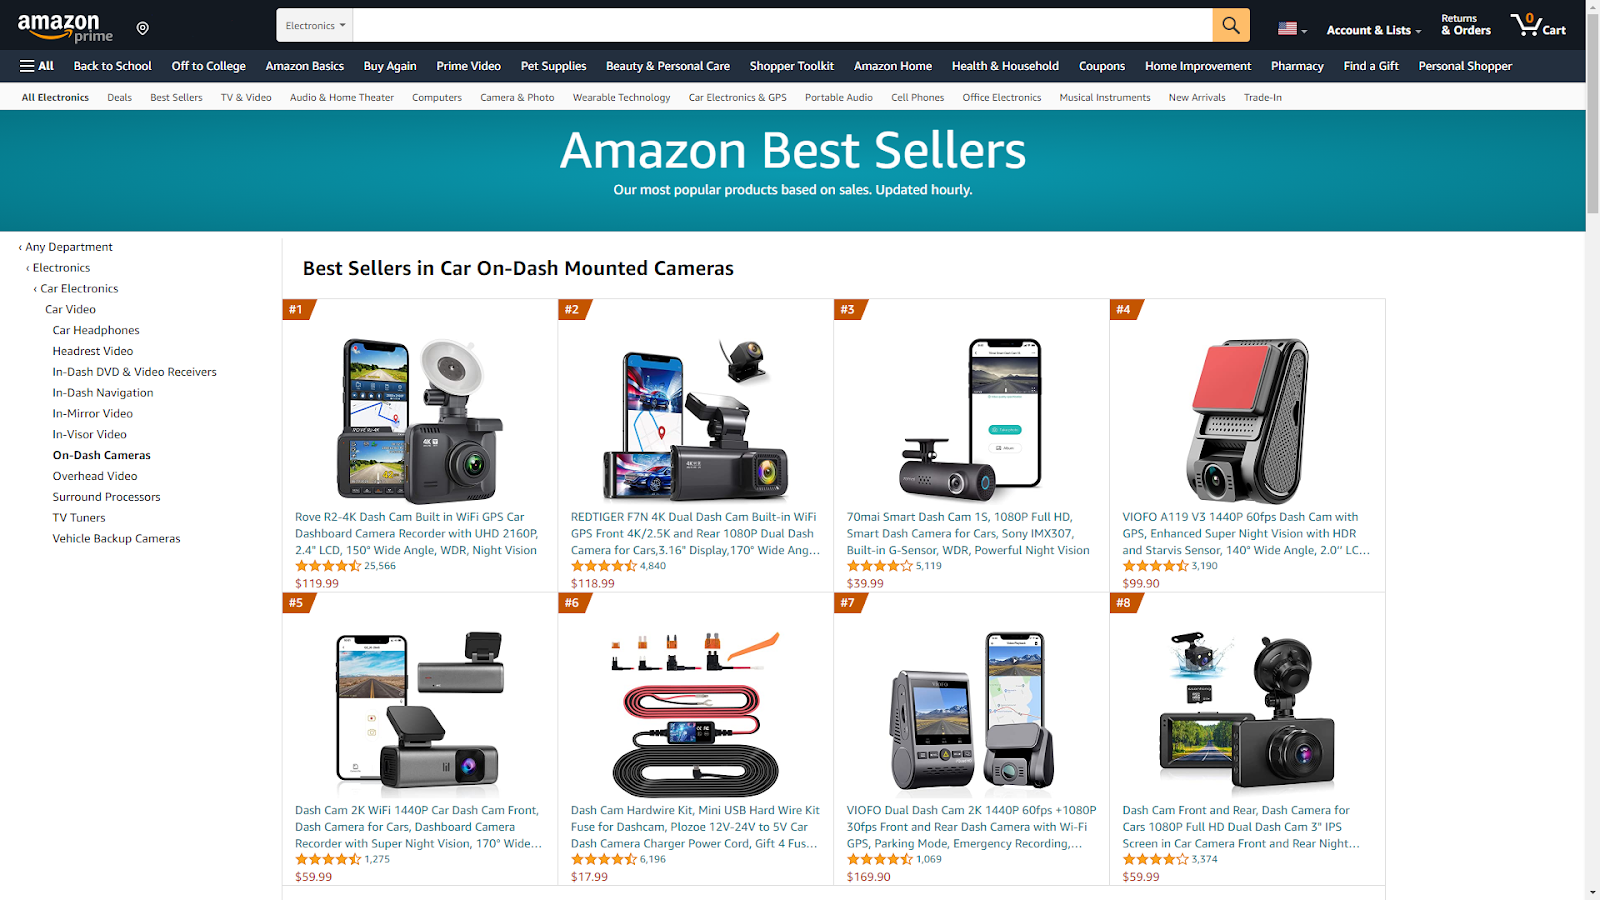 Amazon best sellers page screenshot